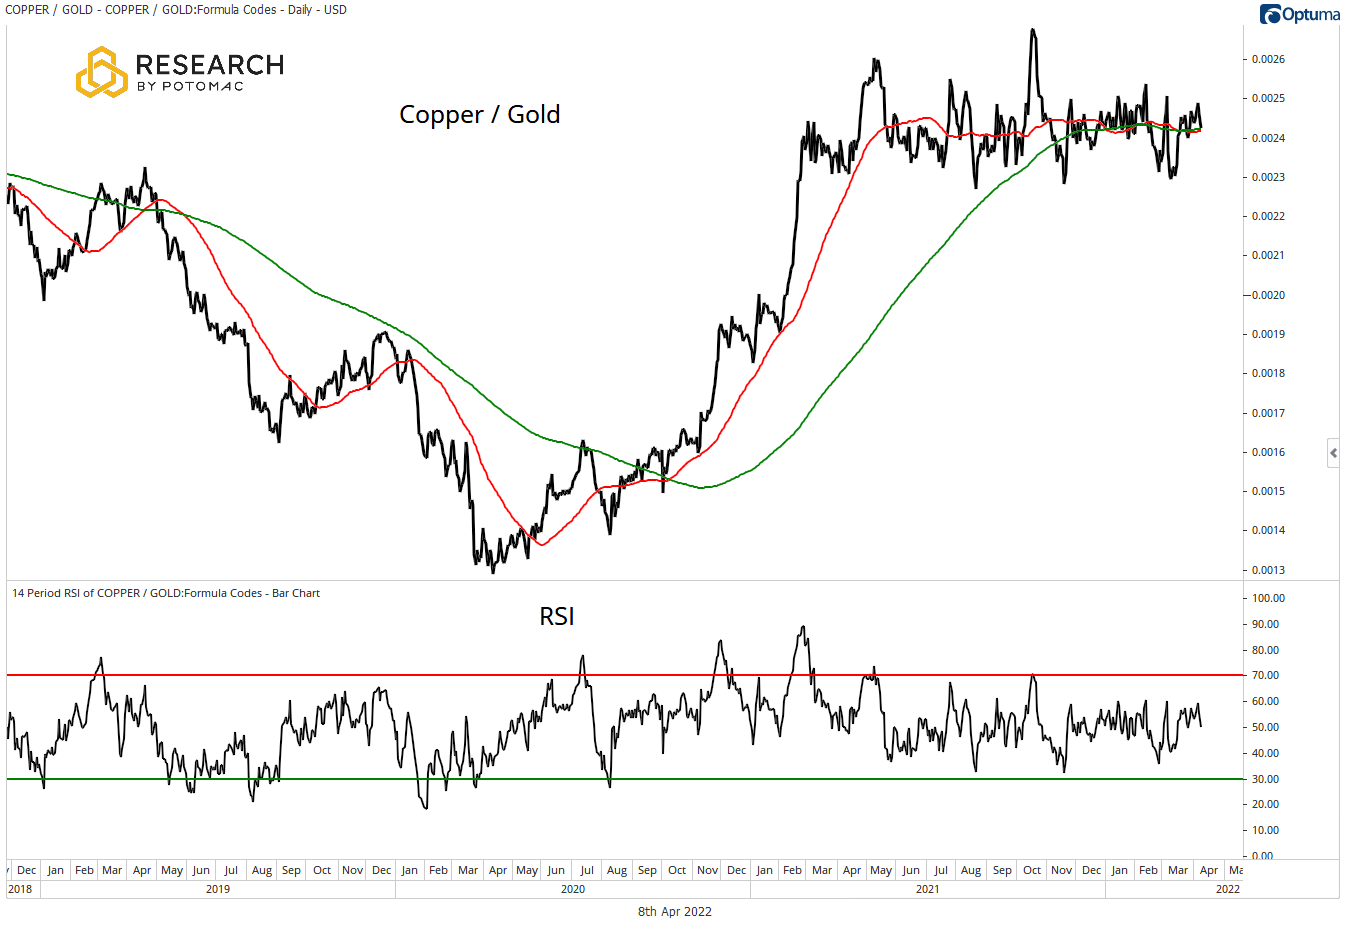 Copper / Gold chart for March 25th research.